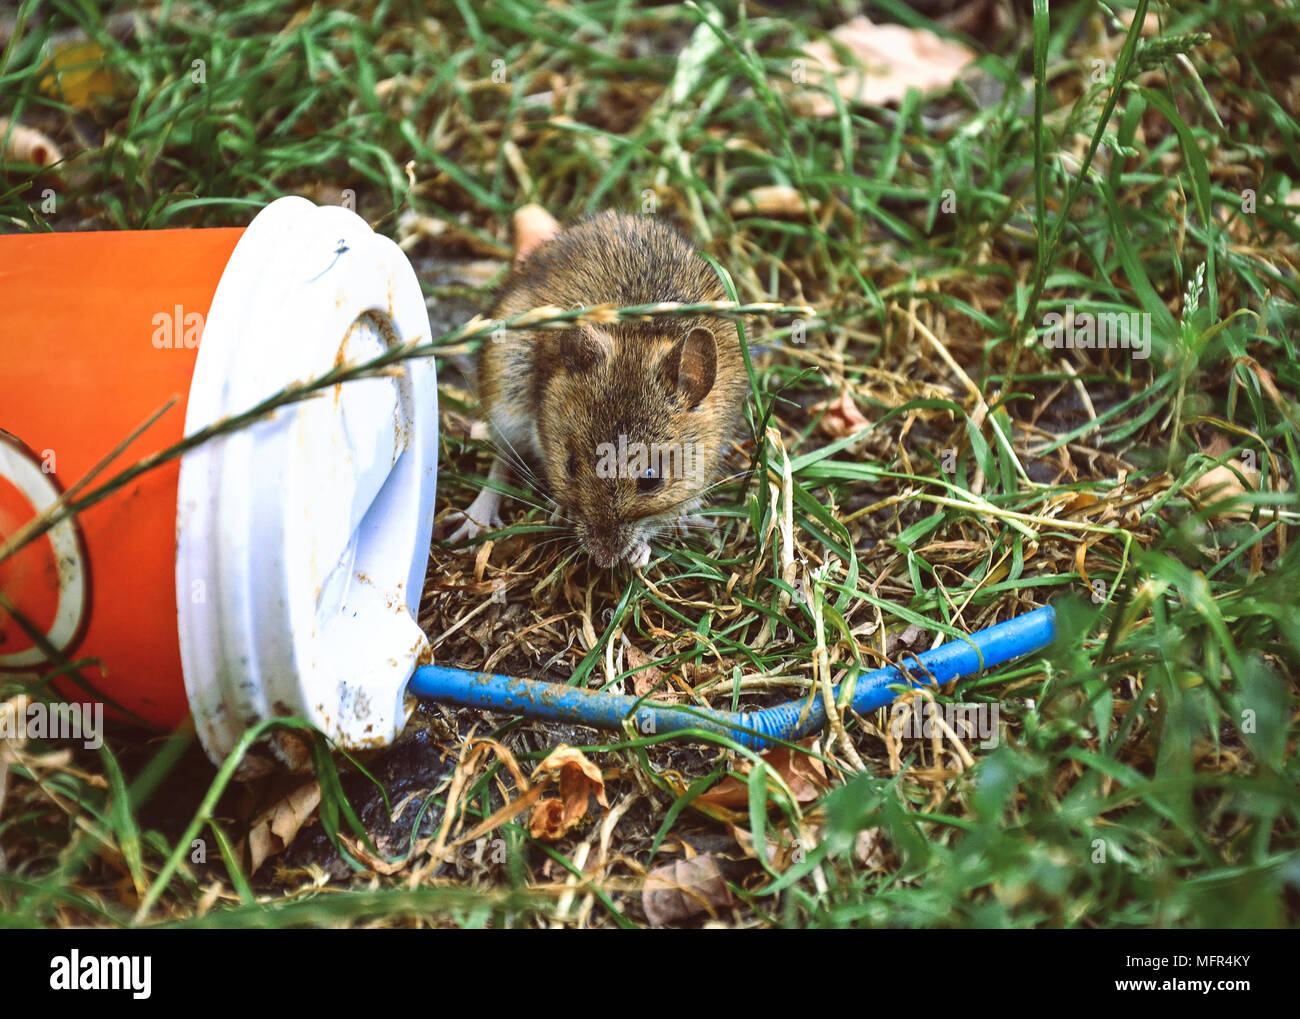 Little rat looking at plastic cup thrown on the grass Stock Photo